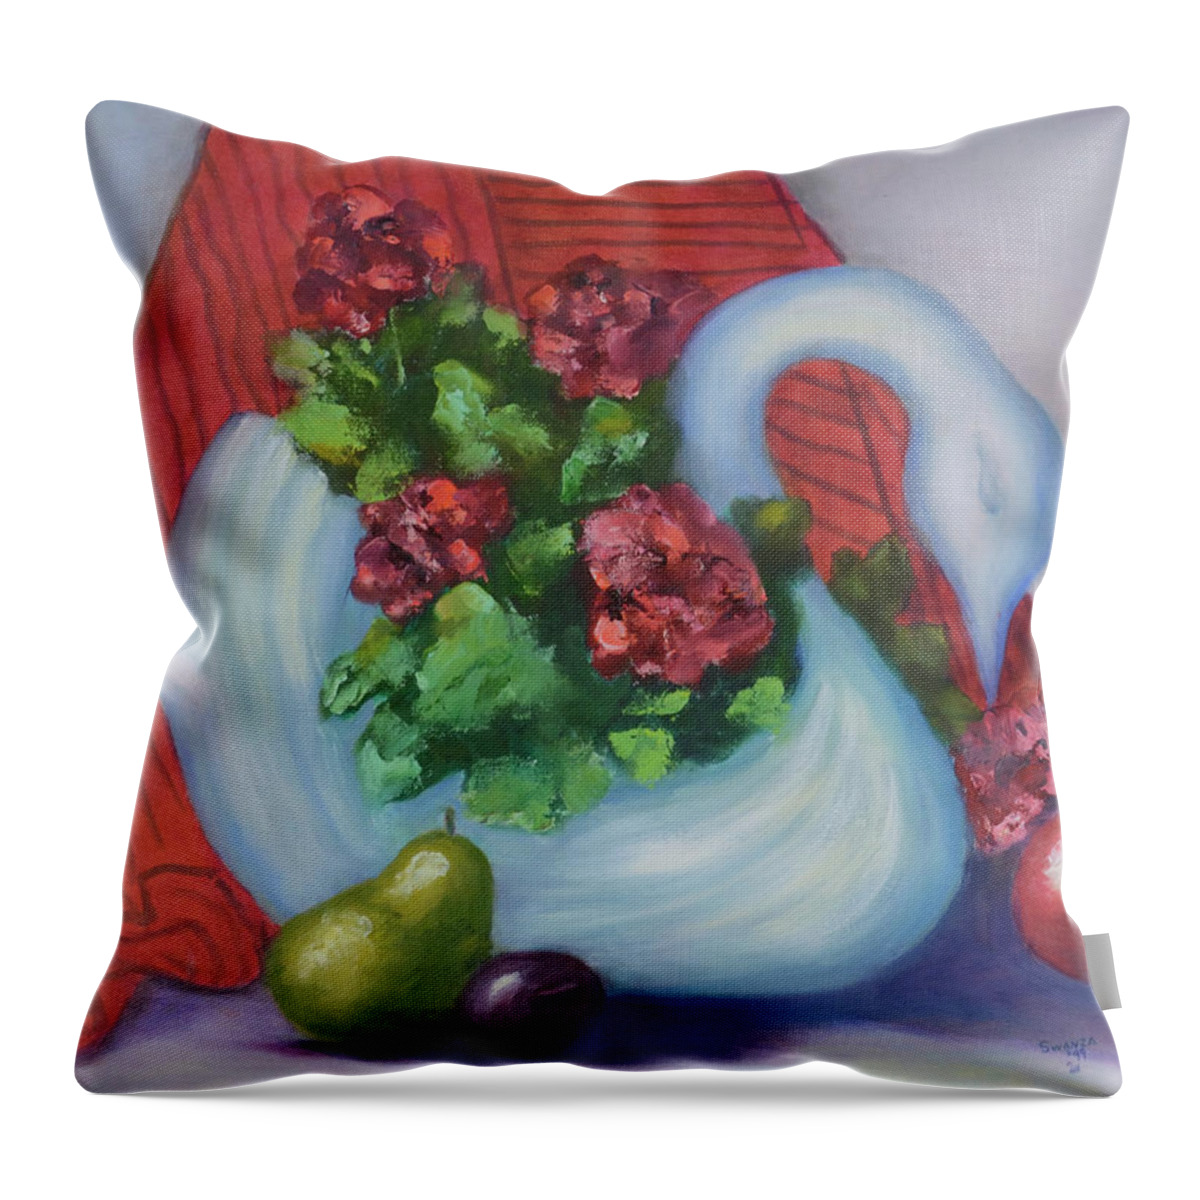 Swan Throw Pillow featuring the painting Swanza's Swan by Quwatha Valentine